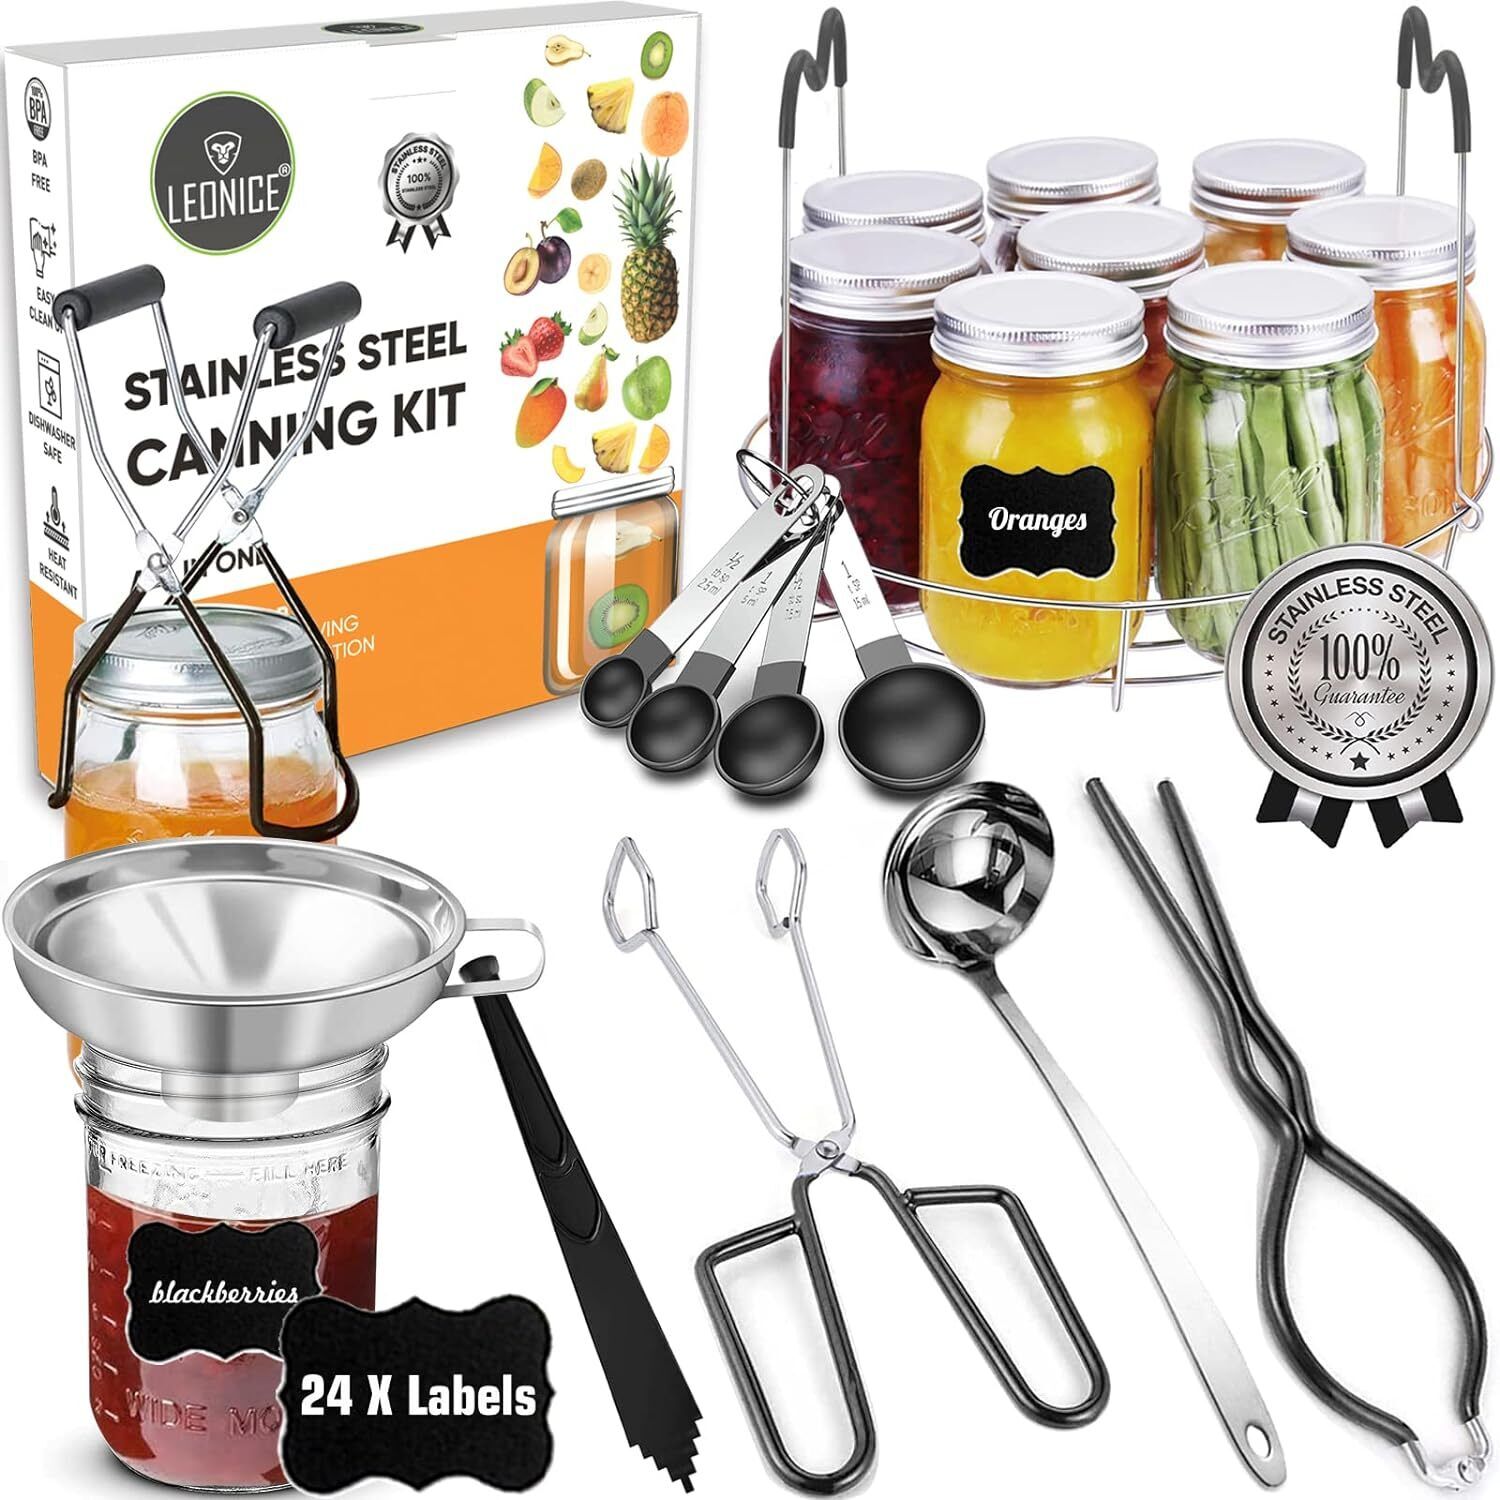 Canning Supplies Starter Kit Stainless Steel Canning Set Tools Rack Ladle Measu 